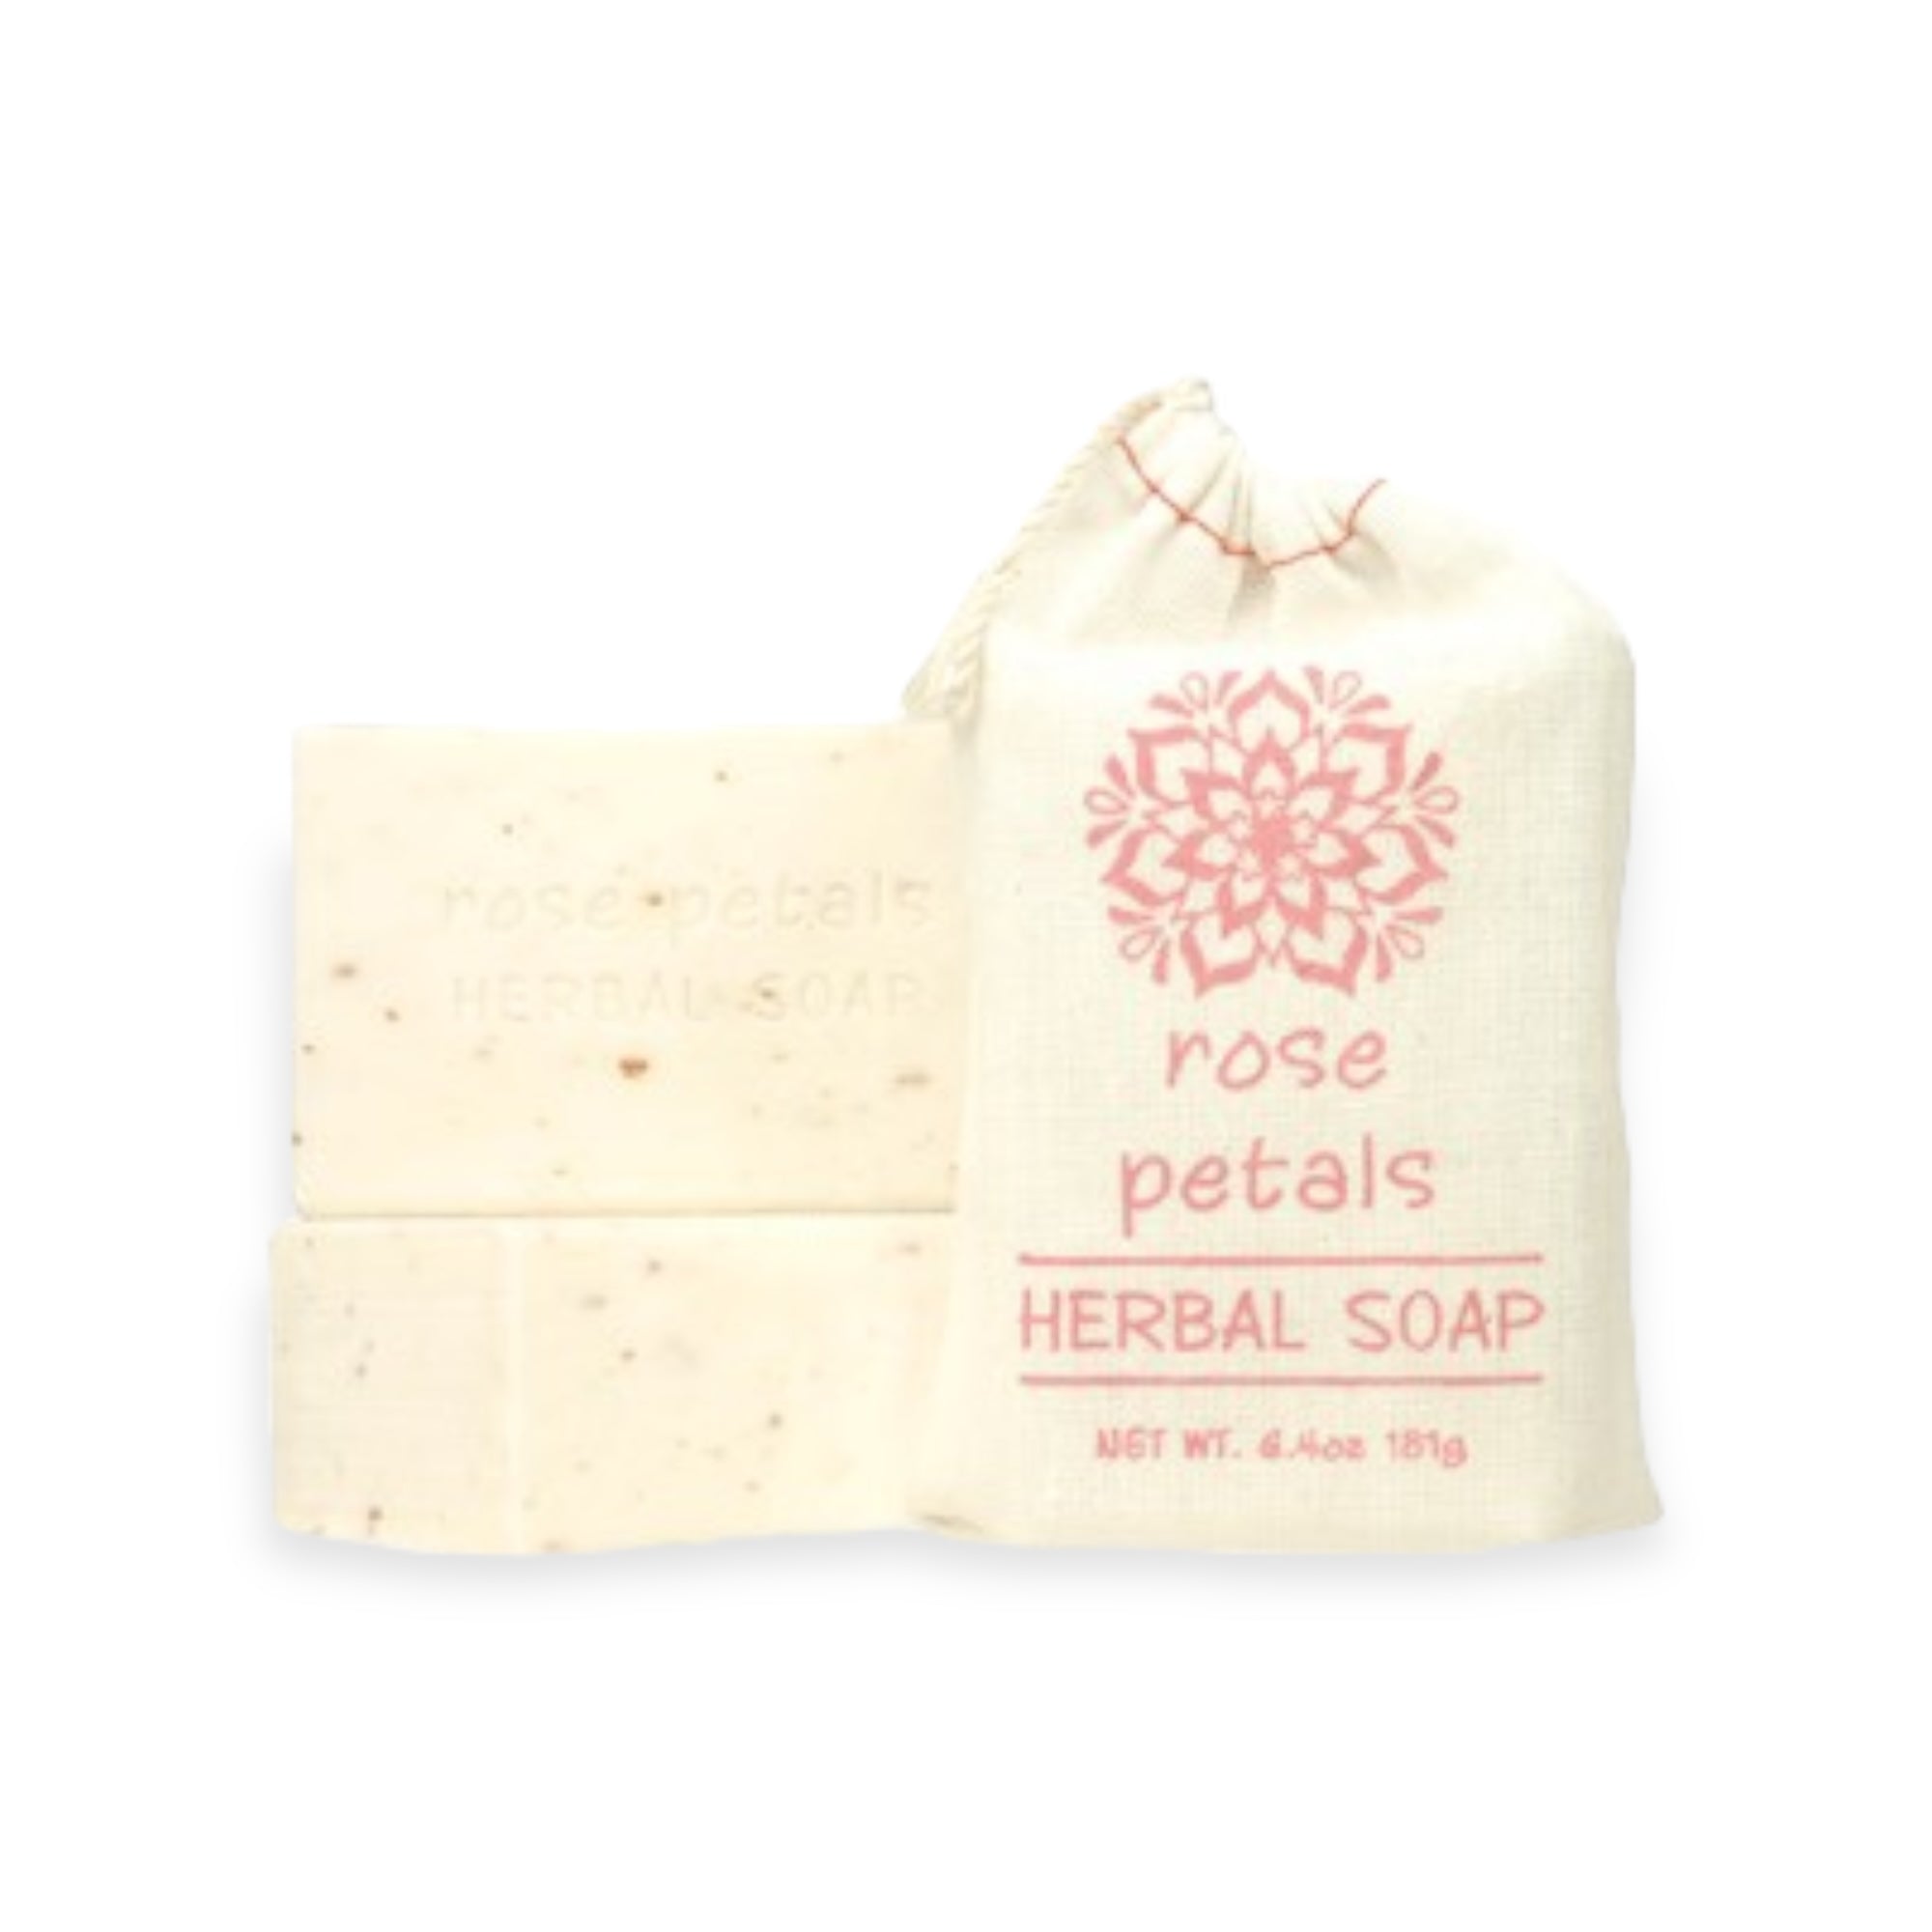 Rose Petals Herbal Soap by Greenwich Bay Trading Co.